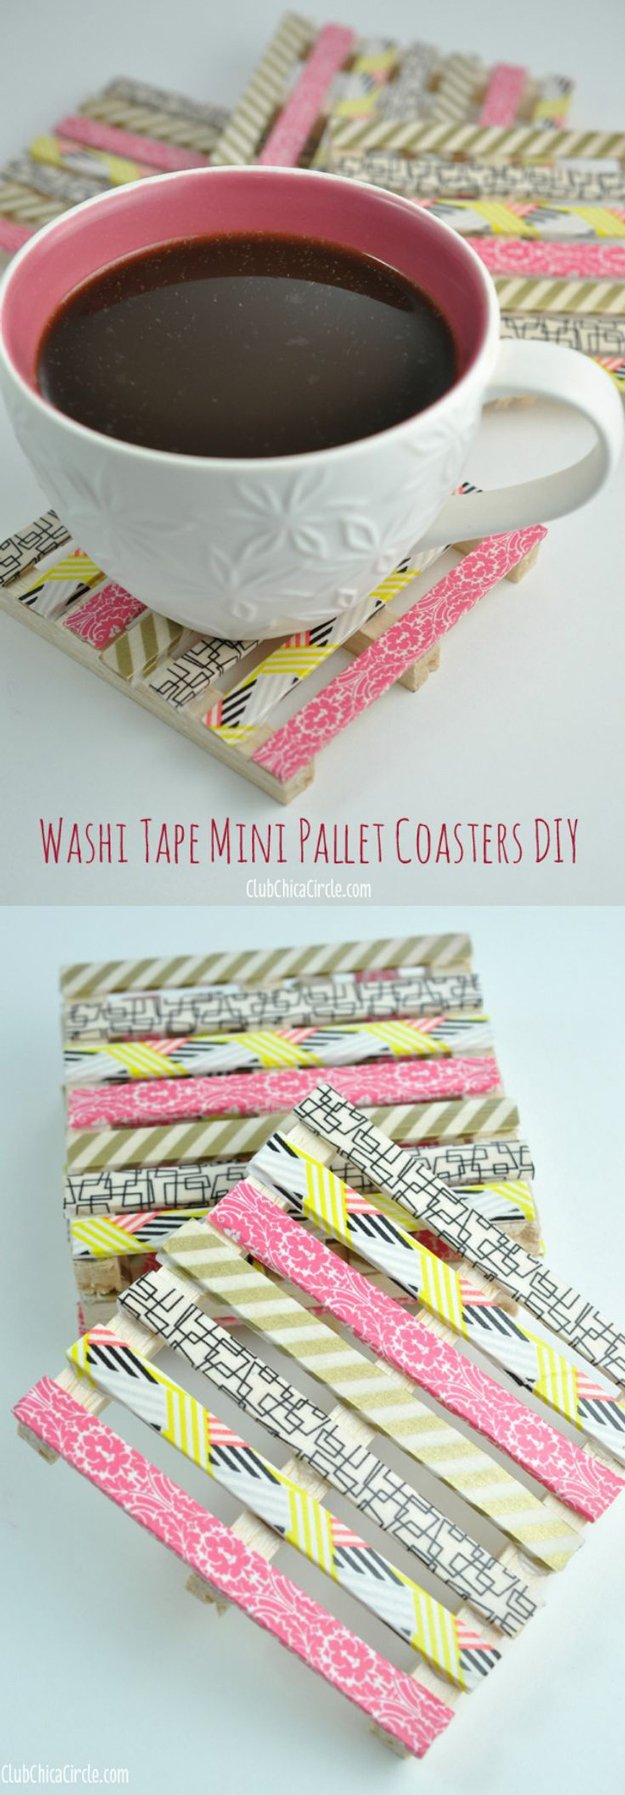 Washi Tape Crafts - Washi Tape Pallet Coasters - Wall Art, Frames, Cards, Pencils, Room Decor and DIY Gifts, Back To School Supplies - Creative, Fun Craft Ideas for Teens, Tweens and Teenagers - Step by Step Tutorials and Instructions #washitape #crafts #cheapcrafts #teencrafts